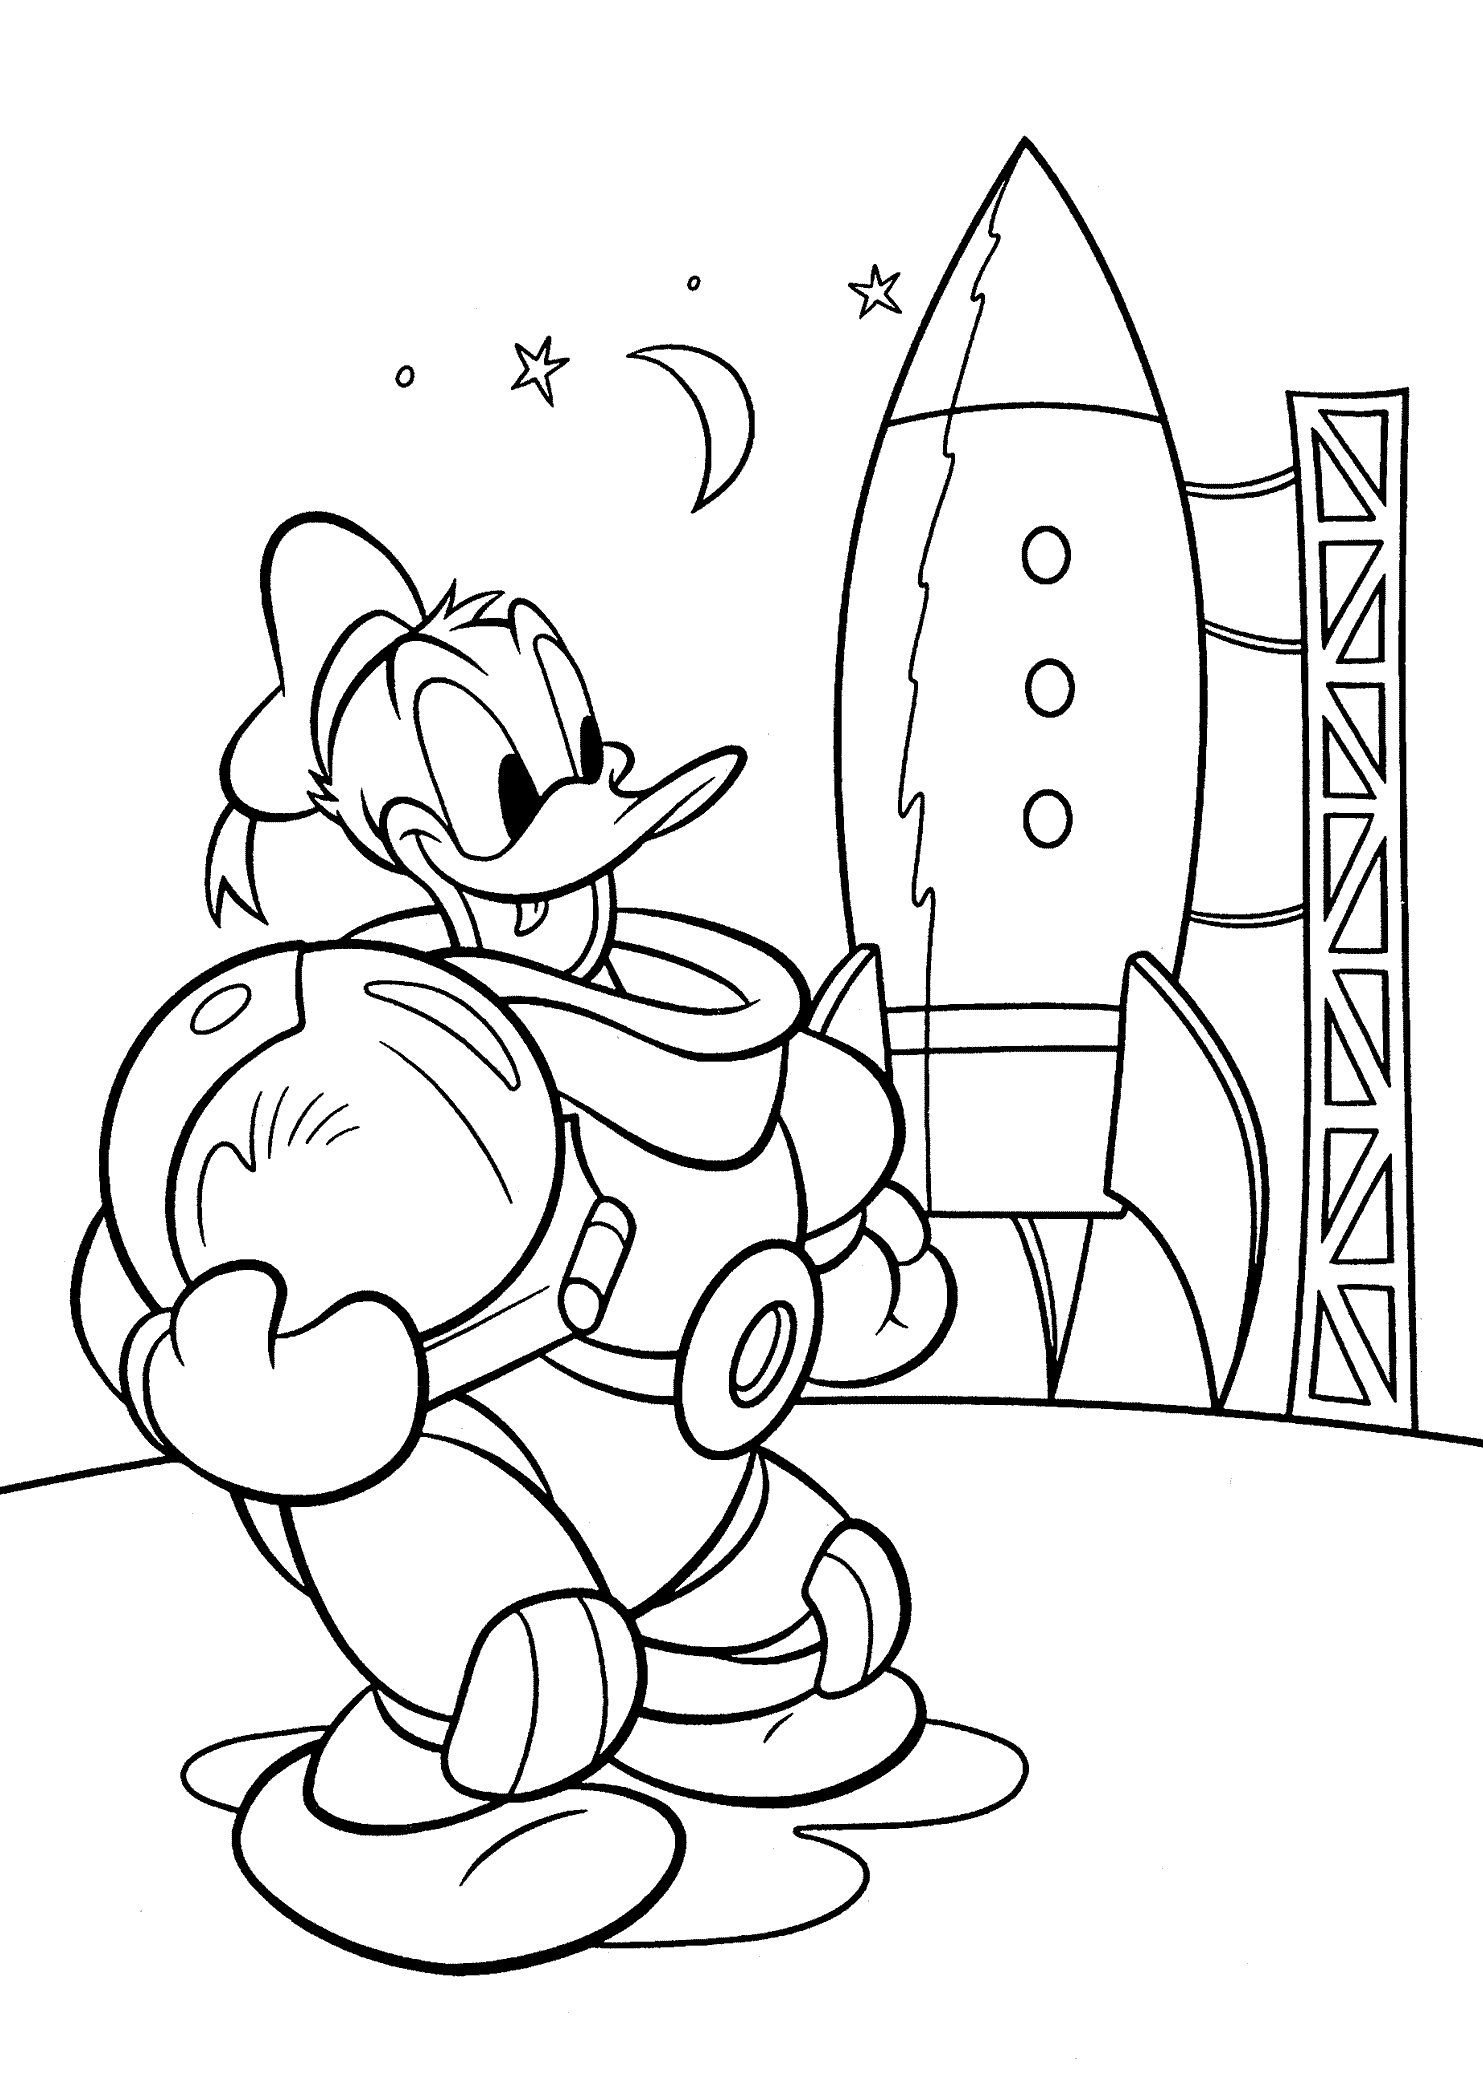 Donald Duck Astronaut Coloring Pages For Kids Printable Free Disney Coloring Pages Mickey Coloring Pages Cartoon Coloring Pages